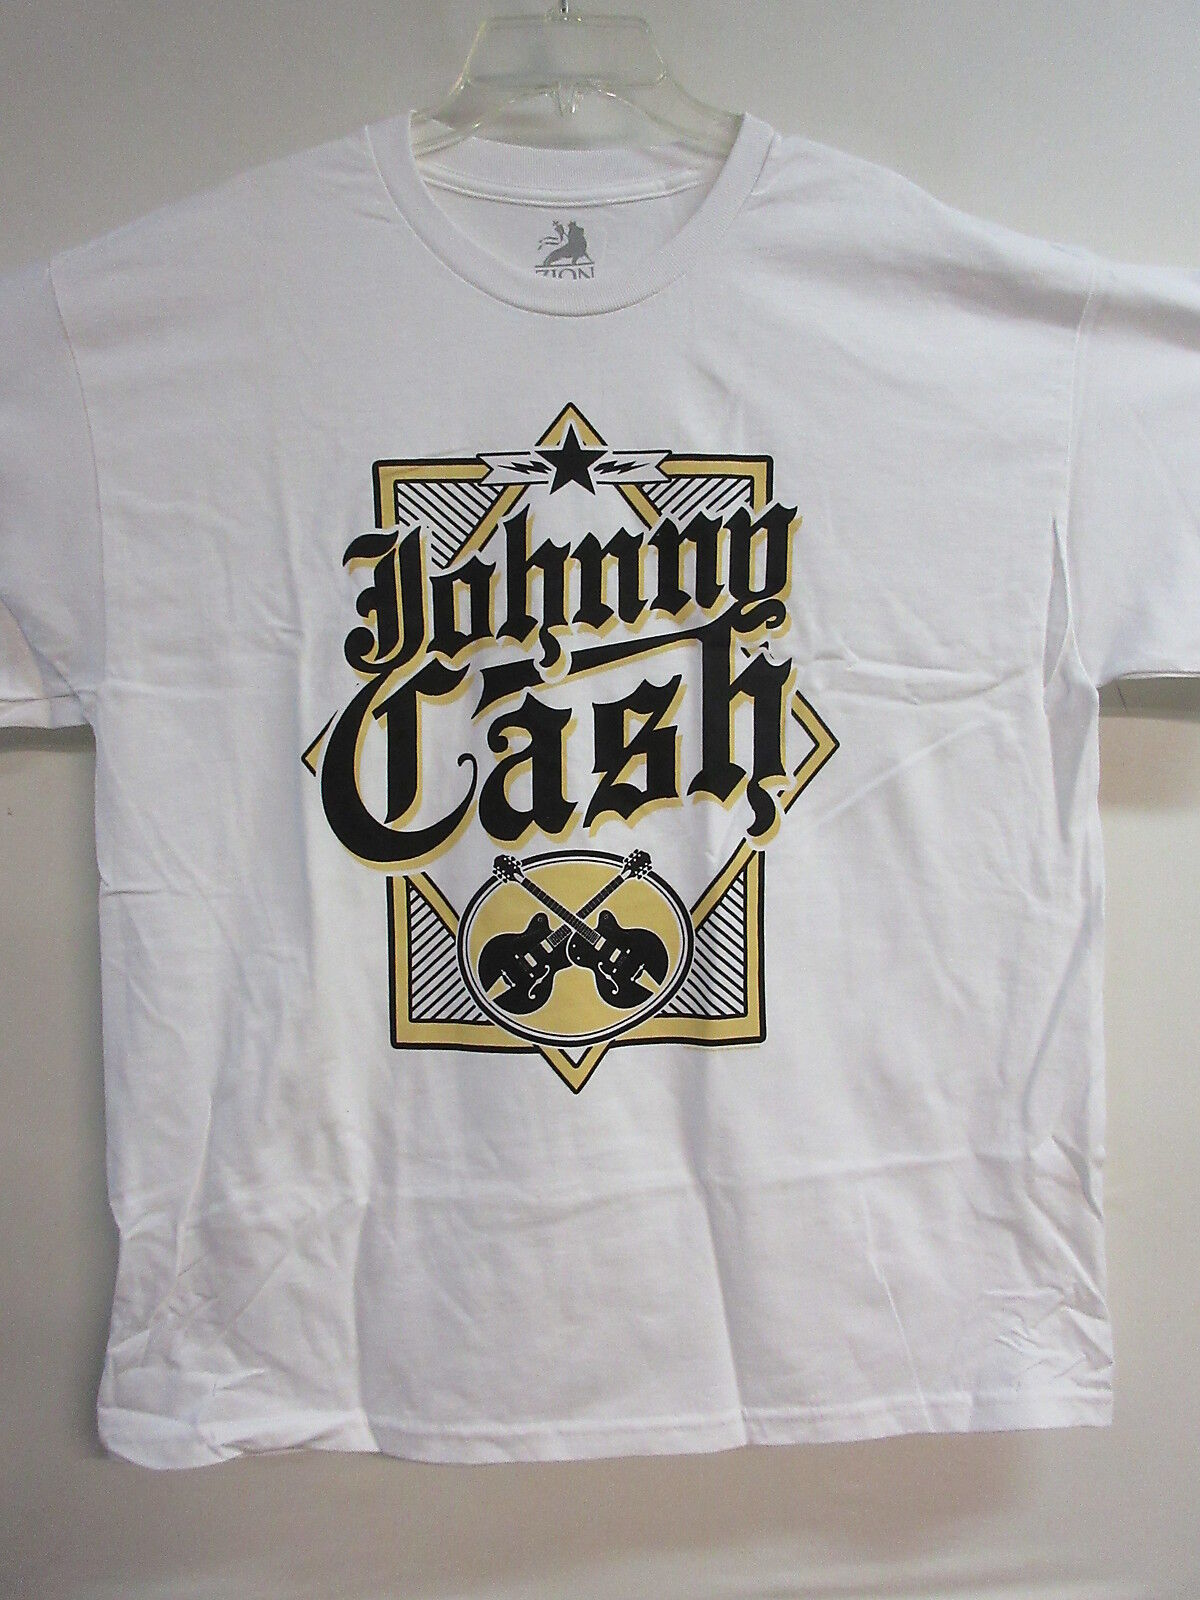 JOHNNY CASH OFFICIAL OLD STOCK MERCH BAND CONCERT MUSIC T- SHIRT